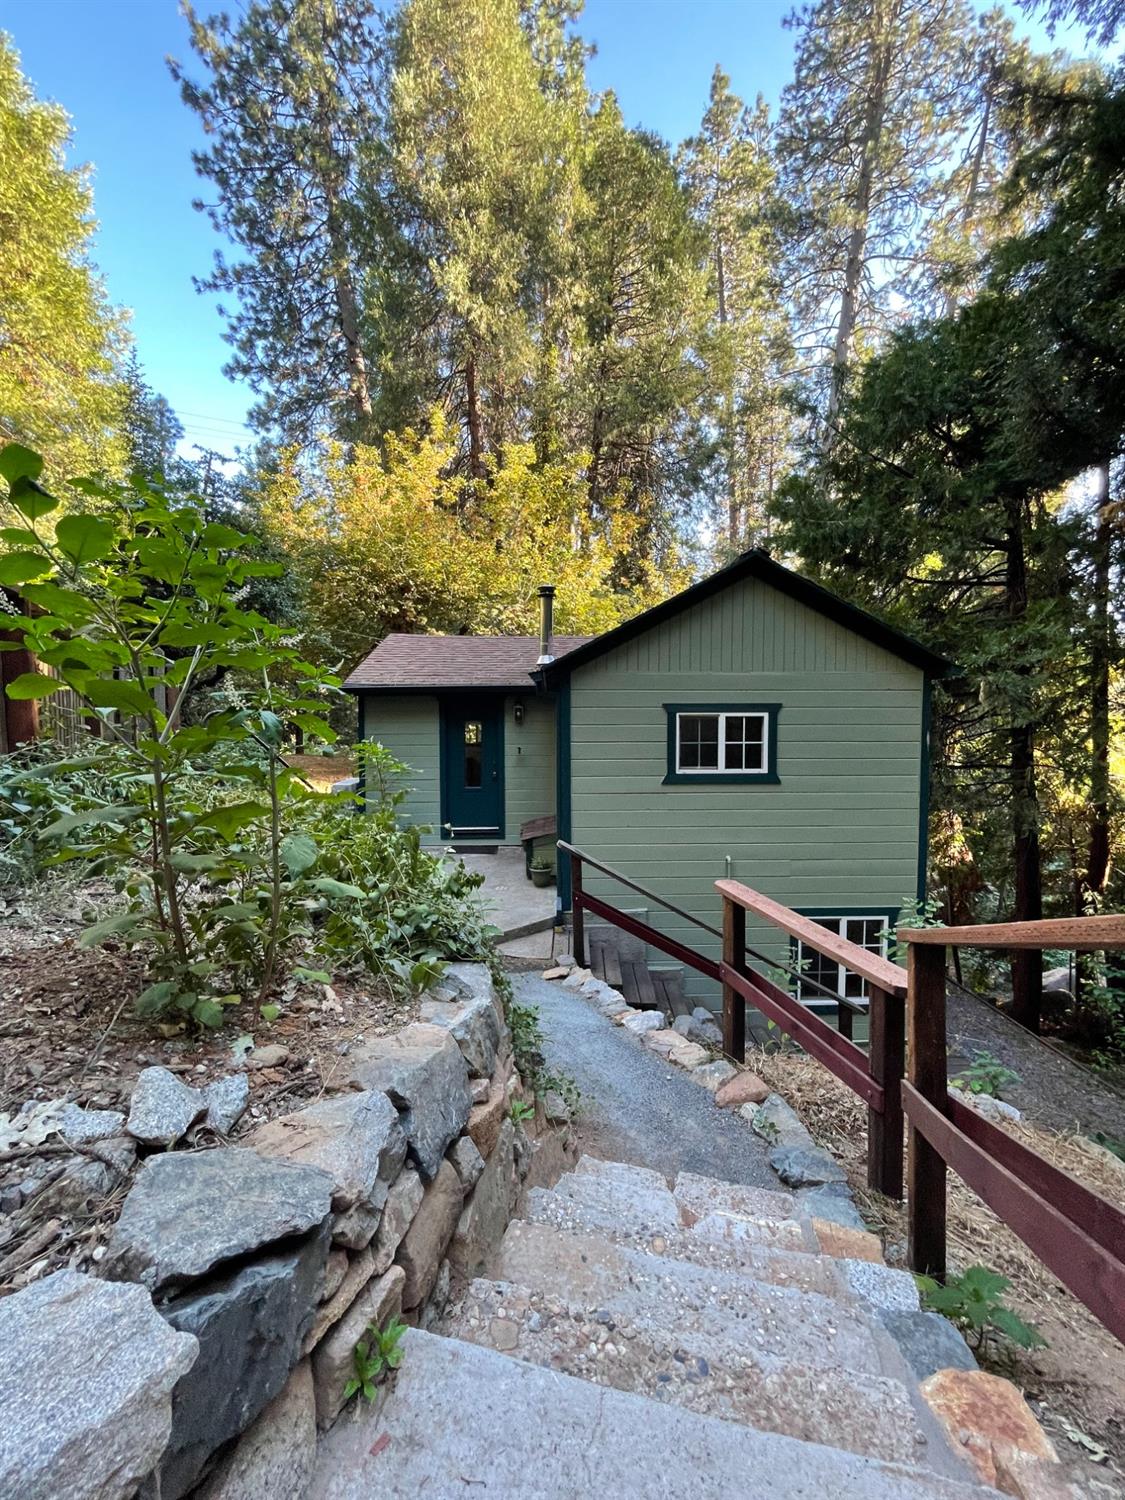 15575 Old Downieville Highway, Nevada City, CA 95959